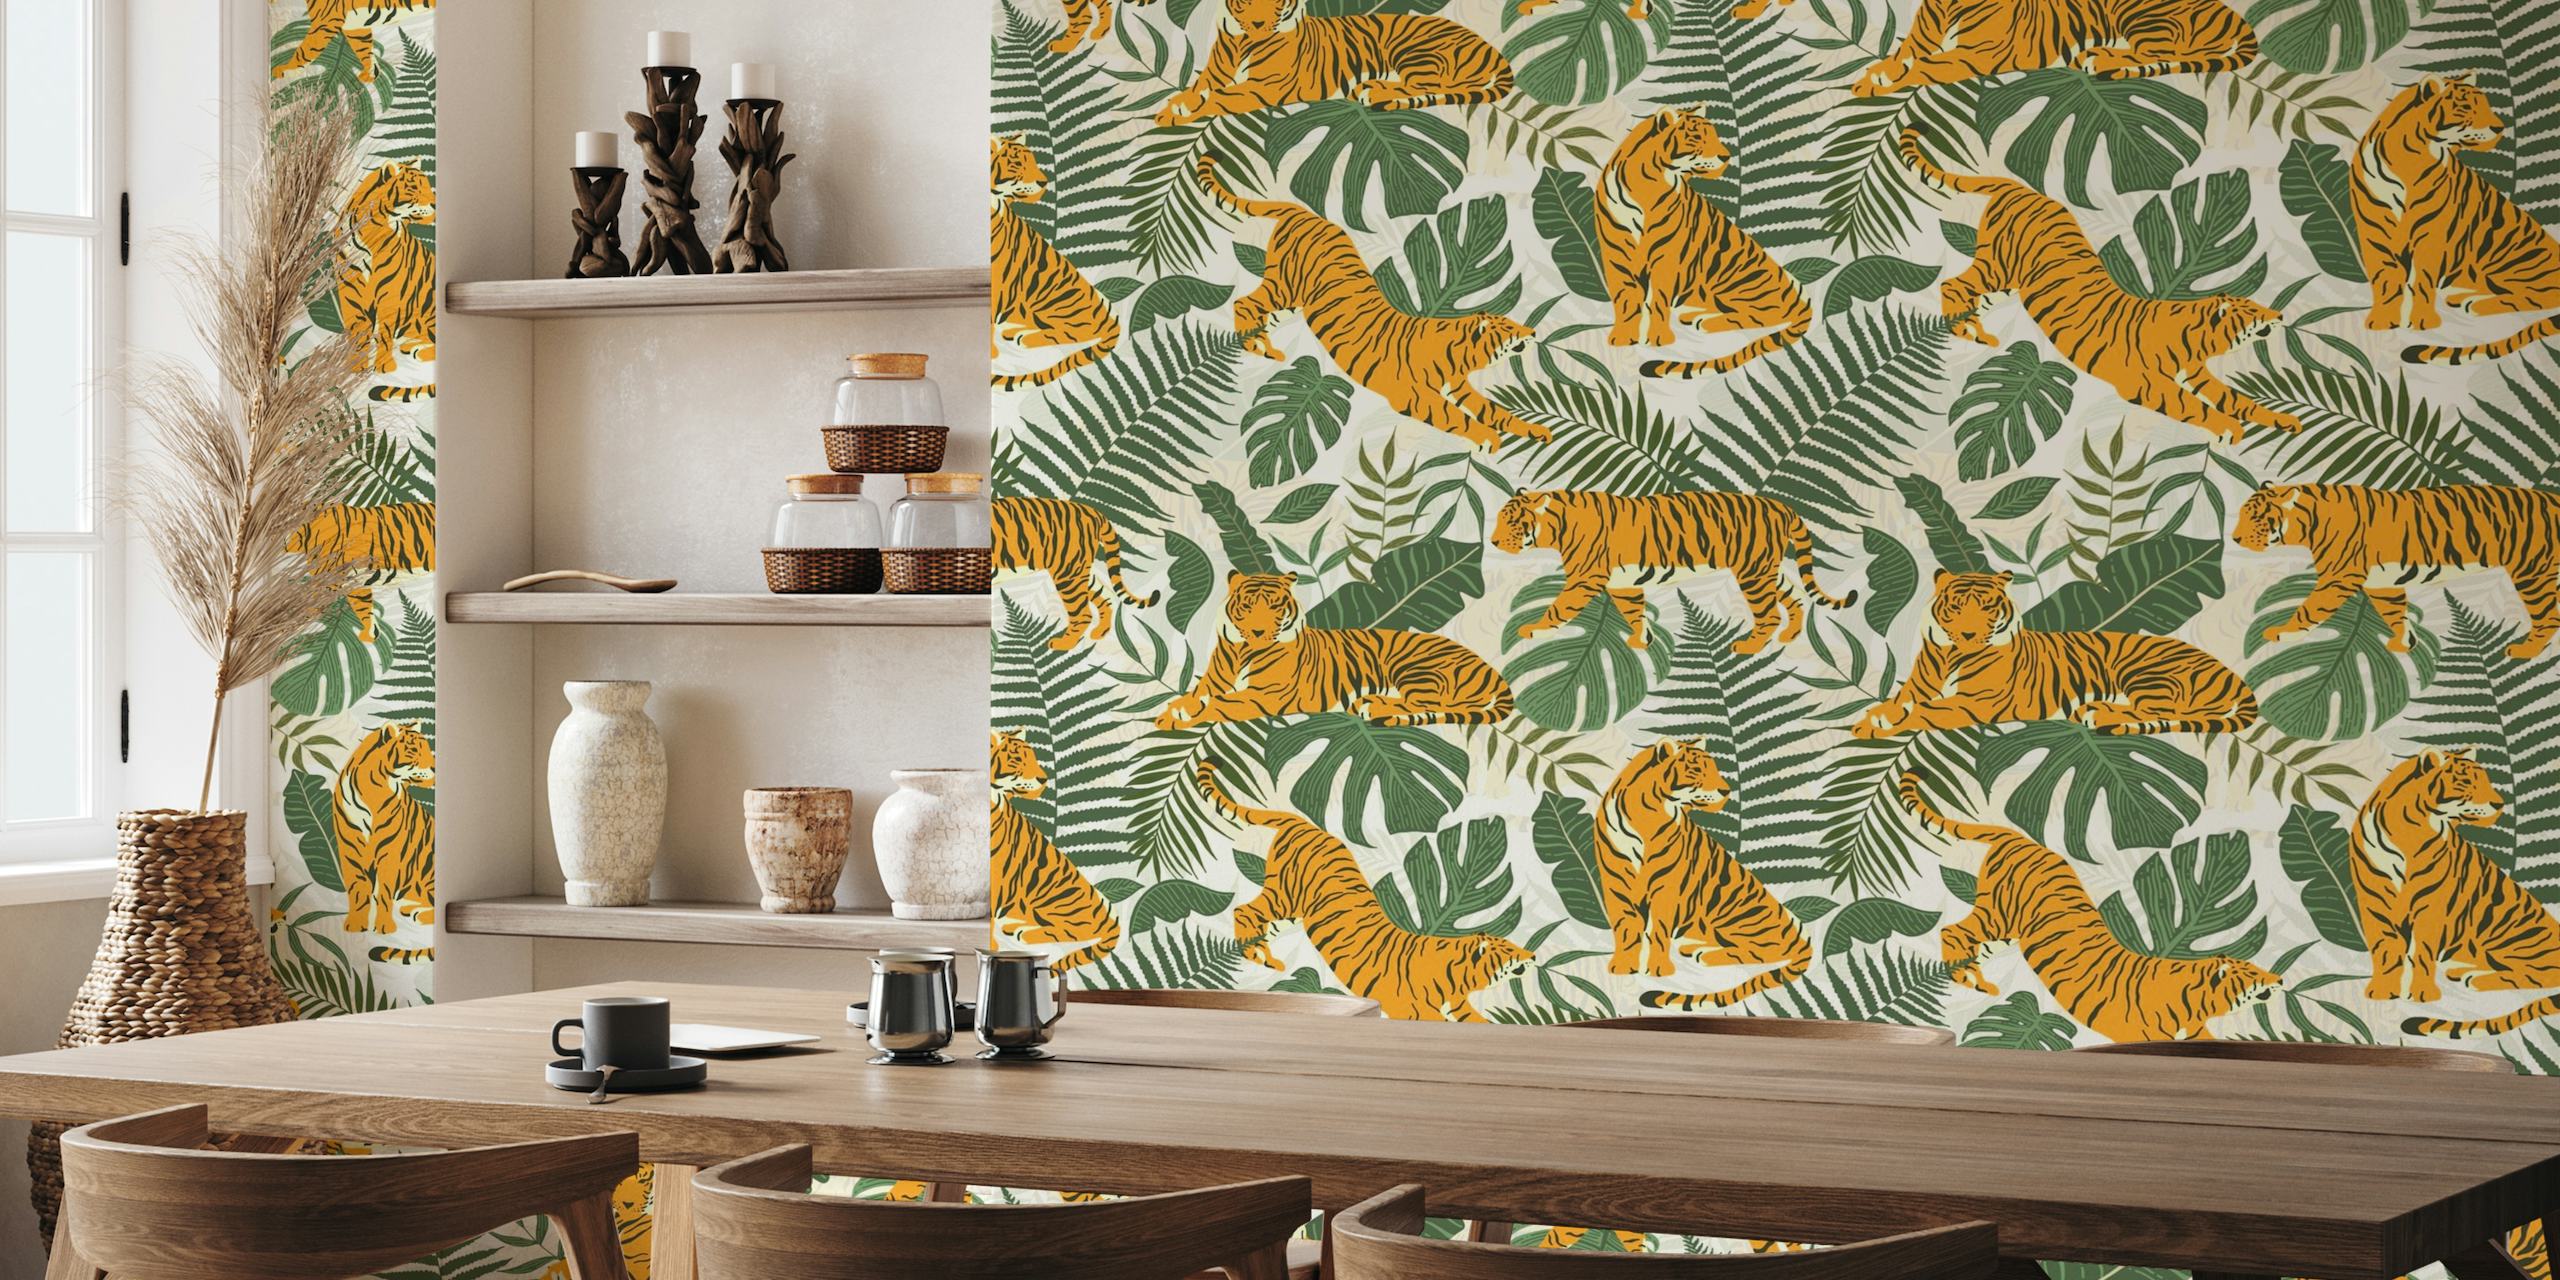 Modern Minimalistic Tiger And Leaves Jungle papel de parede